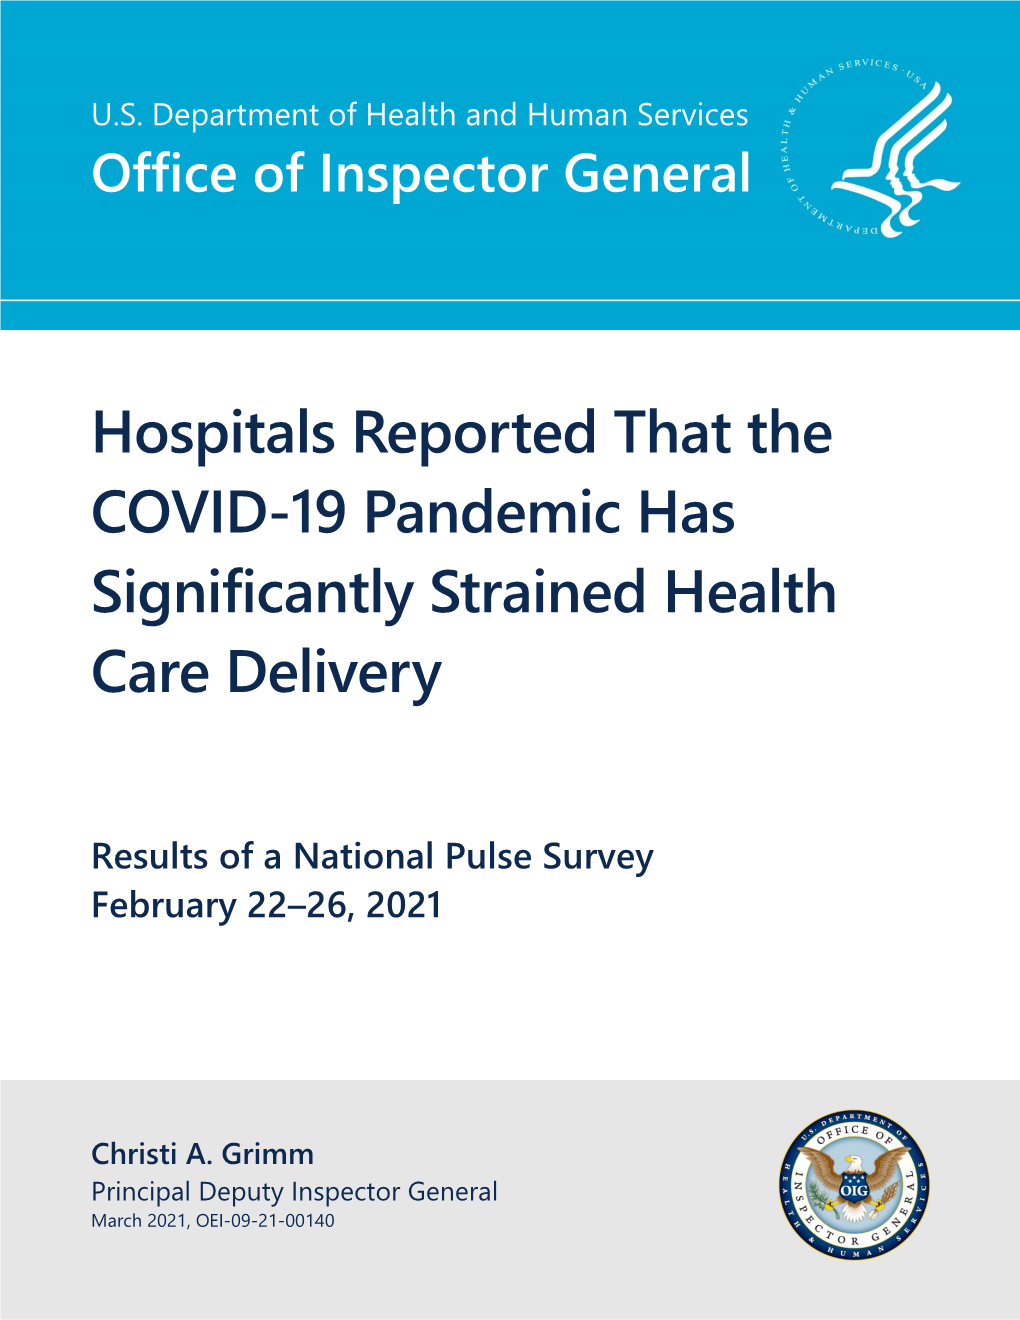 Hospitals Reported That the COVID-19 Pandemic Has Significantly Strained Health Care Delivery